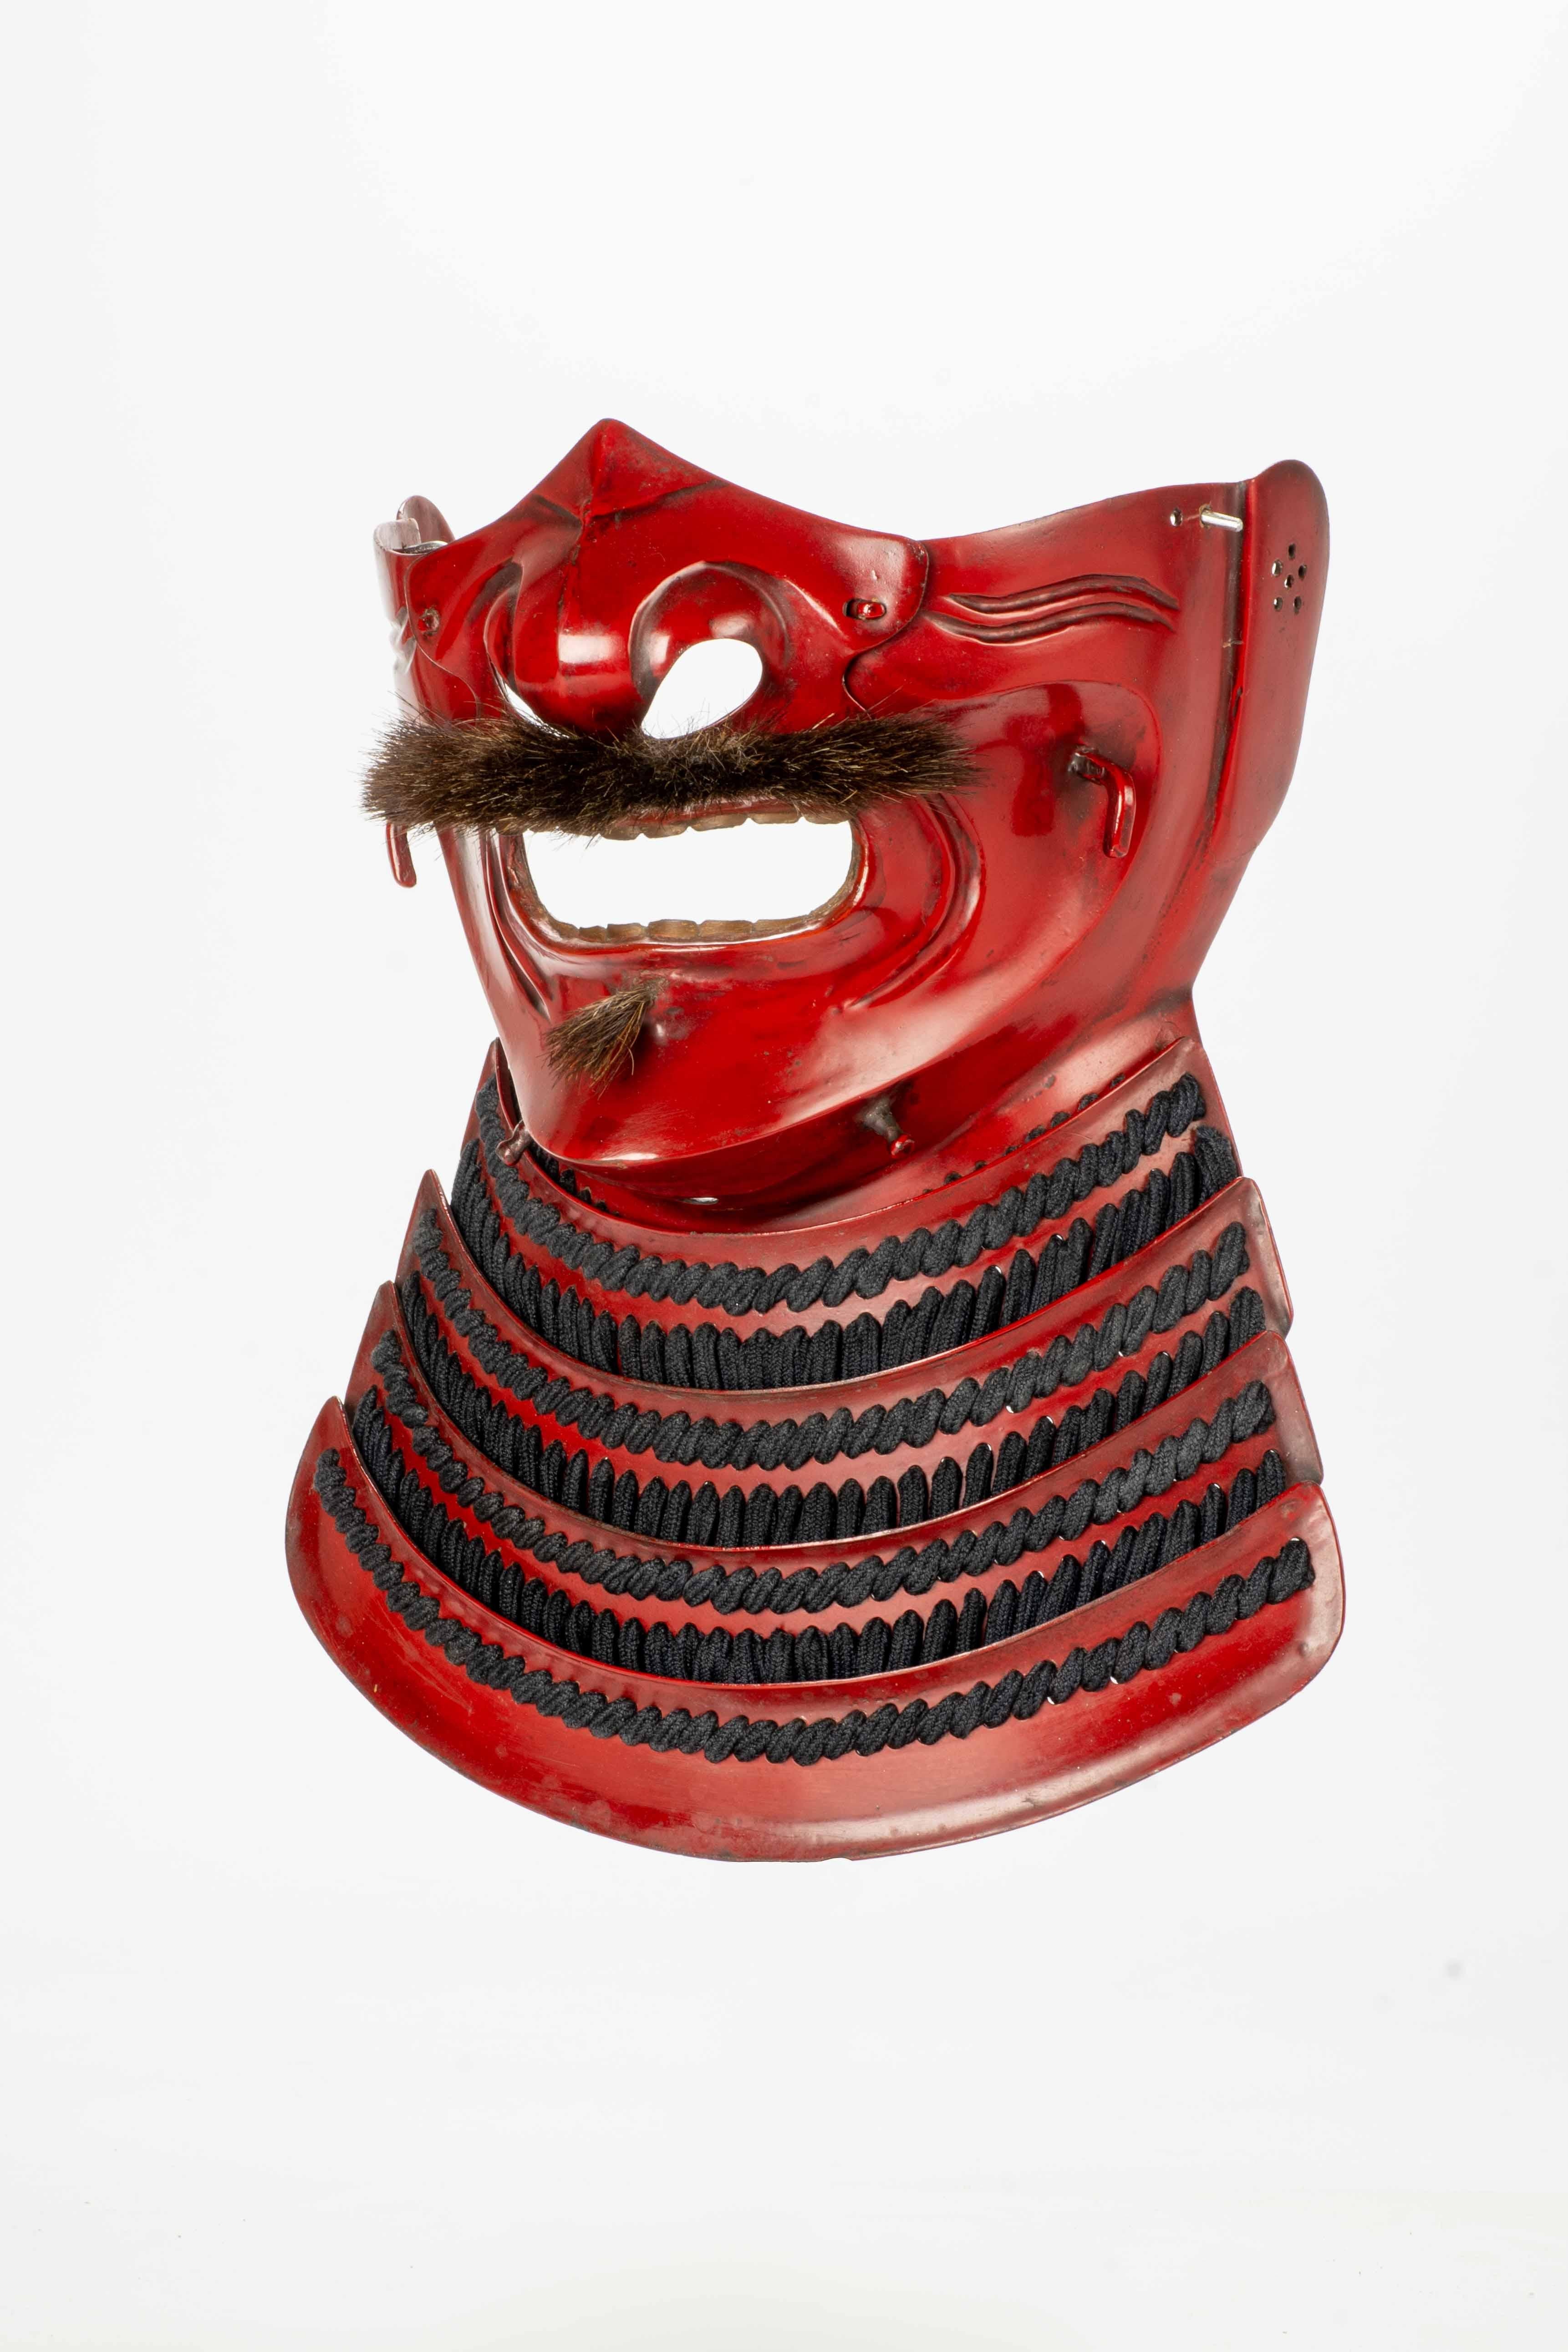 Samurai menpo mask with the 'fierce' ressei expression, with the iron and red lacquer surface which gives the face deep and marked wrinkles.

The generously sized nose adds a distinctive element to the face of the mask, together with the brush